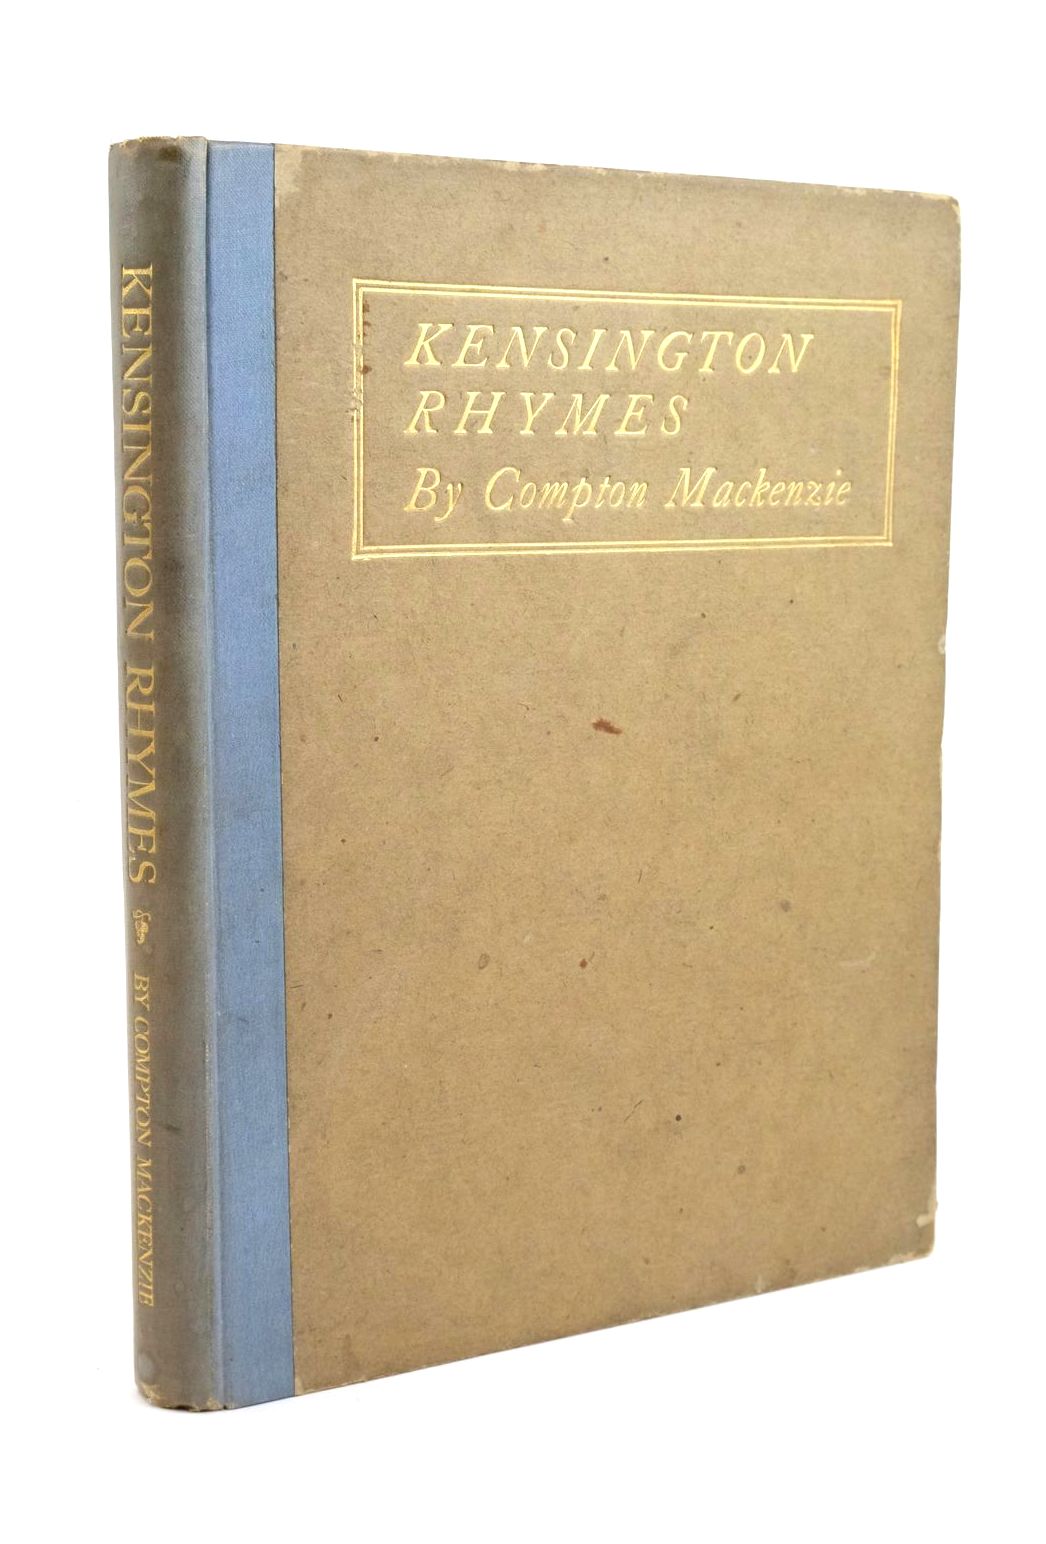 Photo of KENSINGTON RHYMES written by Mackenzie, Compton Monsell, J.R. illustrated by Monsell, J.R. published by Martin Secker (STOCK CODE: 1322245)  for sale by Stella & Rose's Books